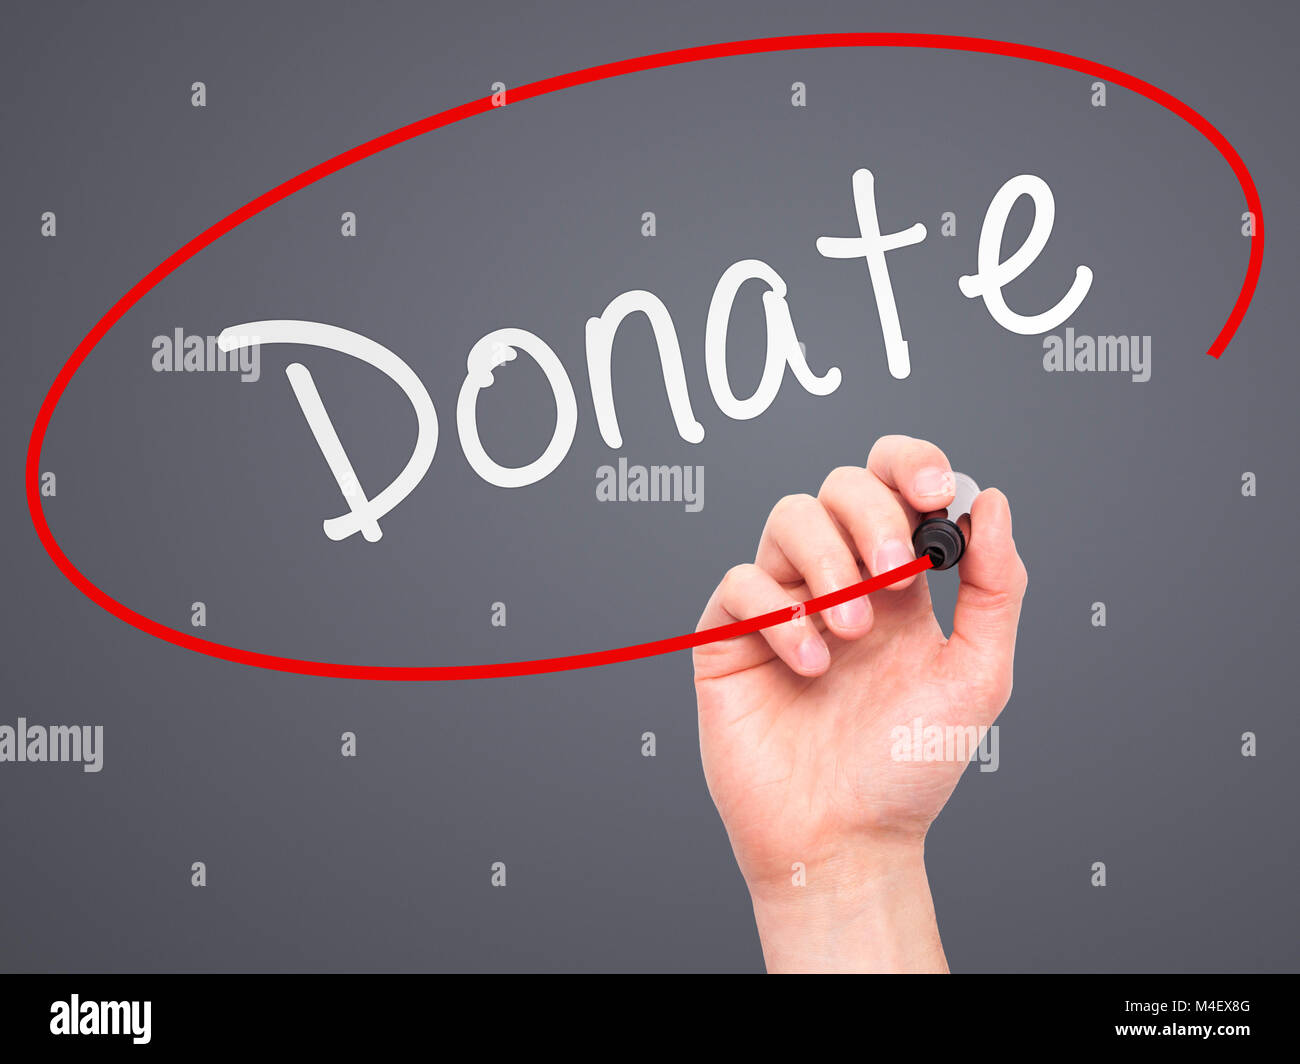 Man Hand writing Donate with marker on transparent wipe board Stock Photo